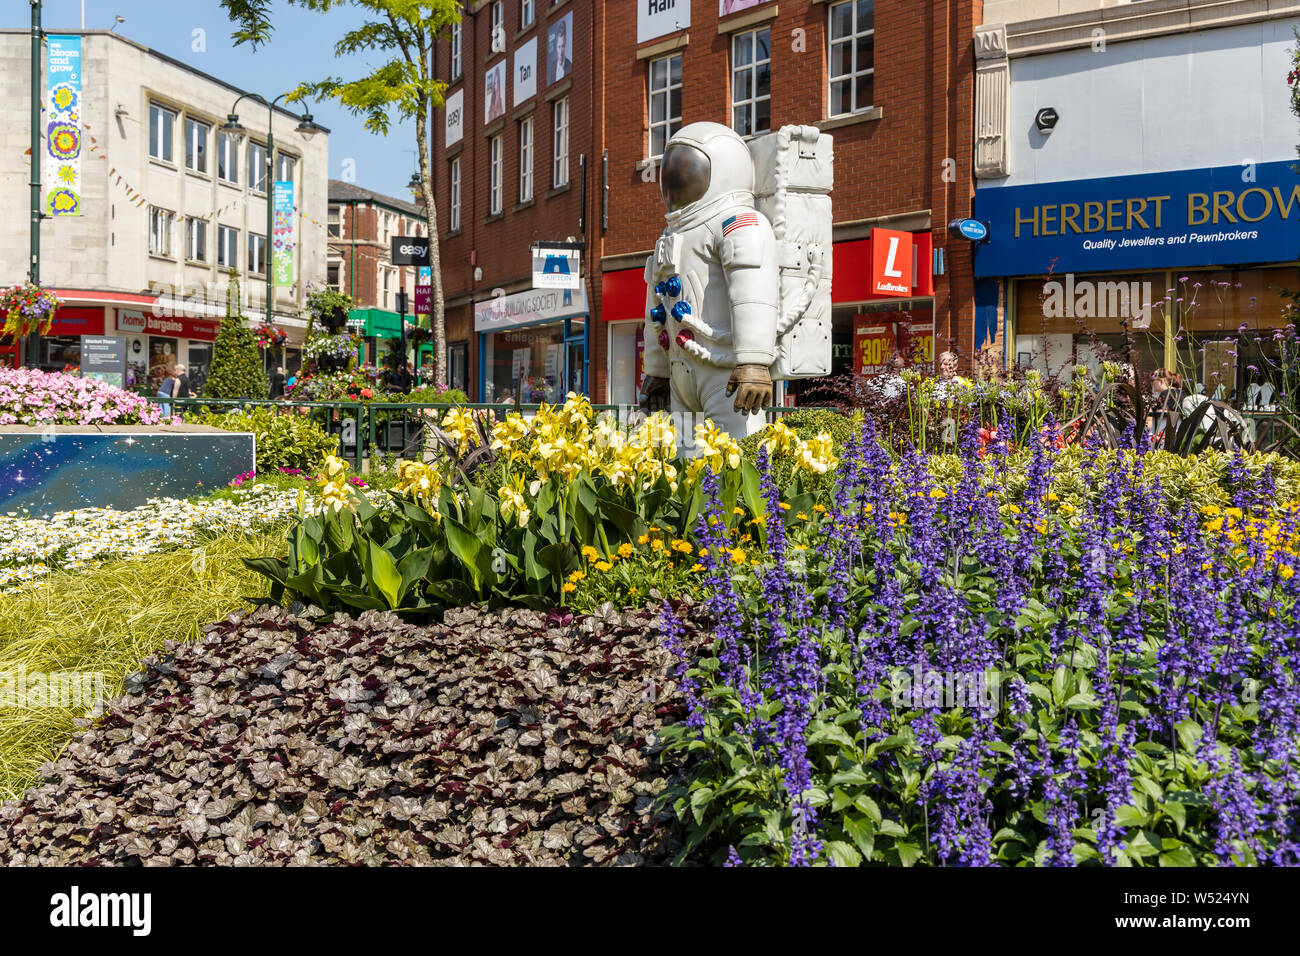 Alien landscape with American astronauts landing on the Moon theme community garden in the middle of town in North West of England. Stock Photo